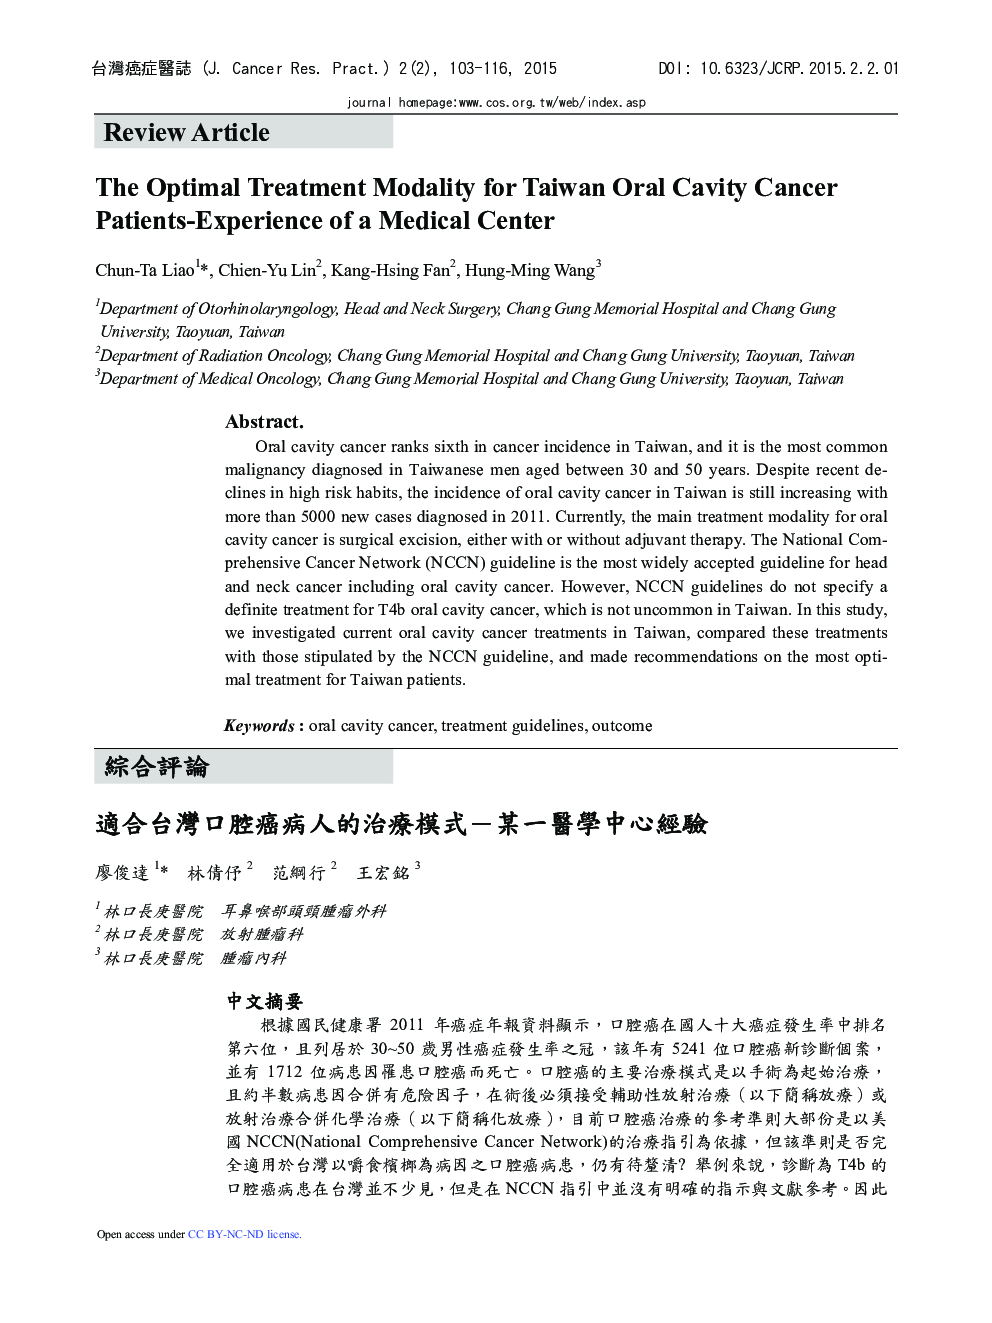 The Optimal Treatment Modality for Taiwan Oral Cavity Cancer Patients-Experience of a Medical Center